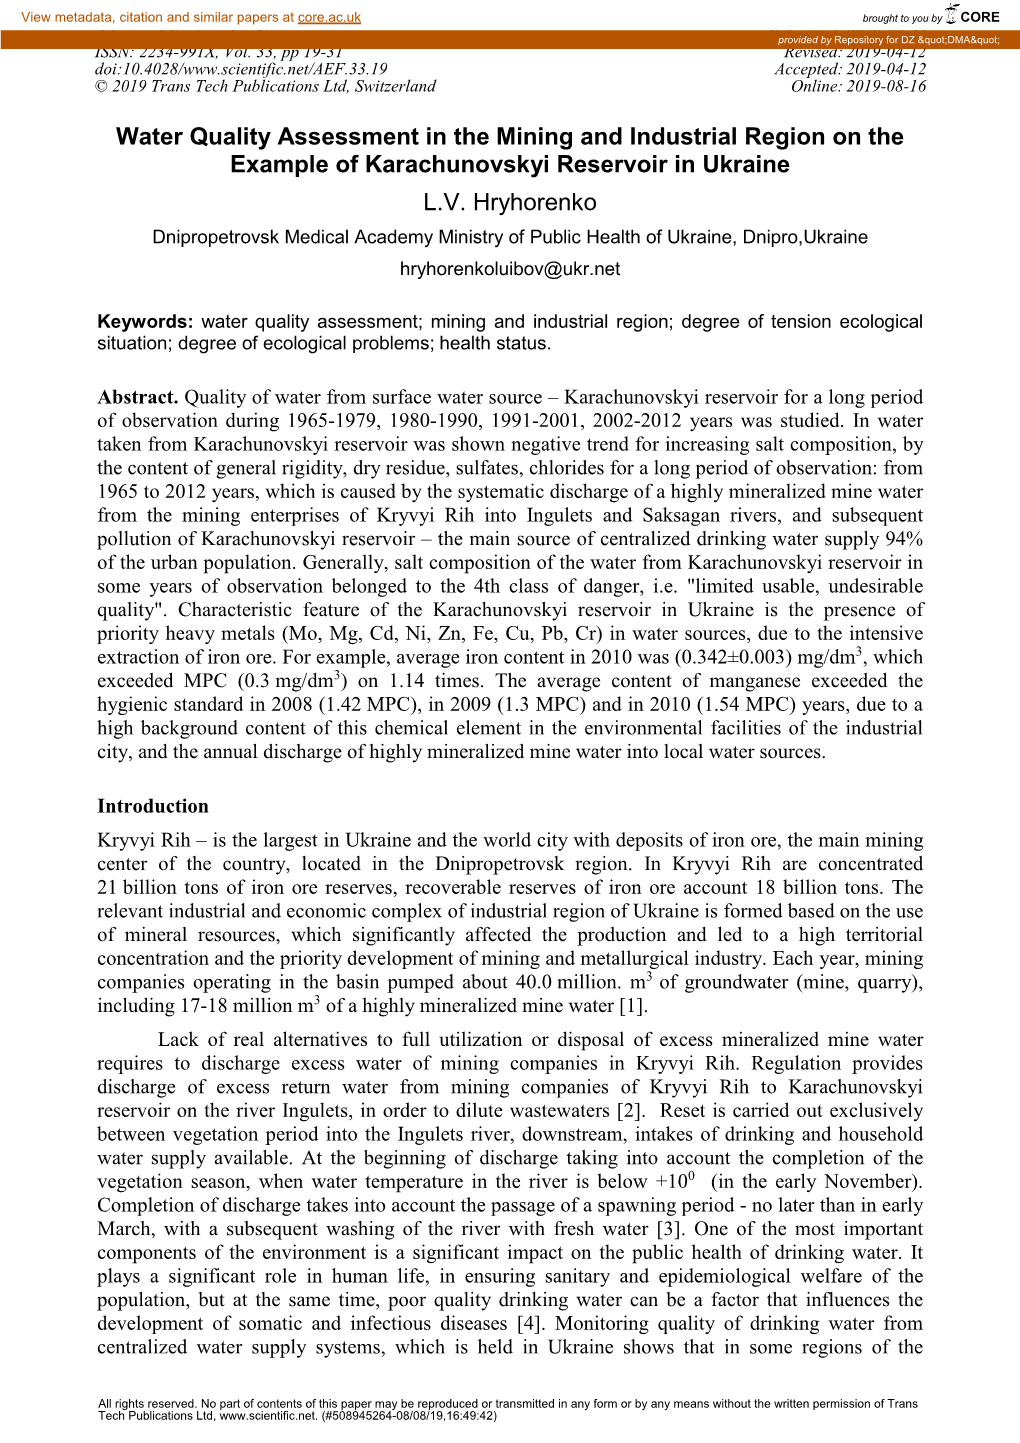 Water Quality Assessment in the Mining and Industrial Region on the Example of Karachunovskyi Reservoir in Ukraine L.V